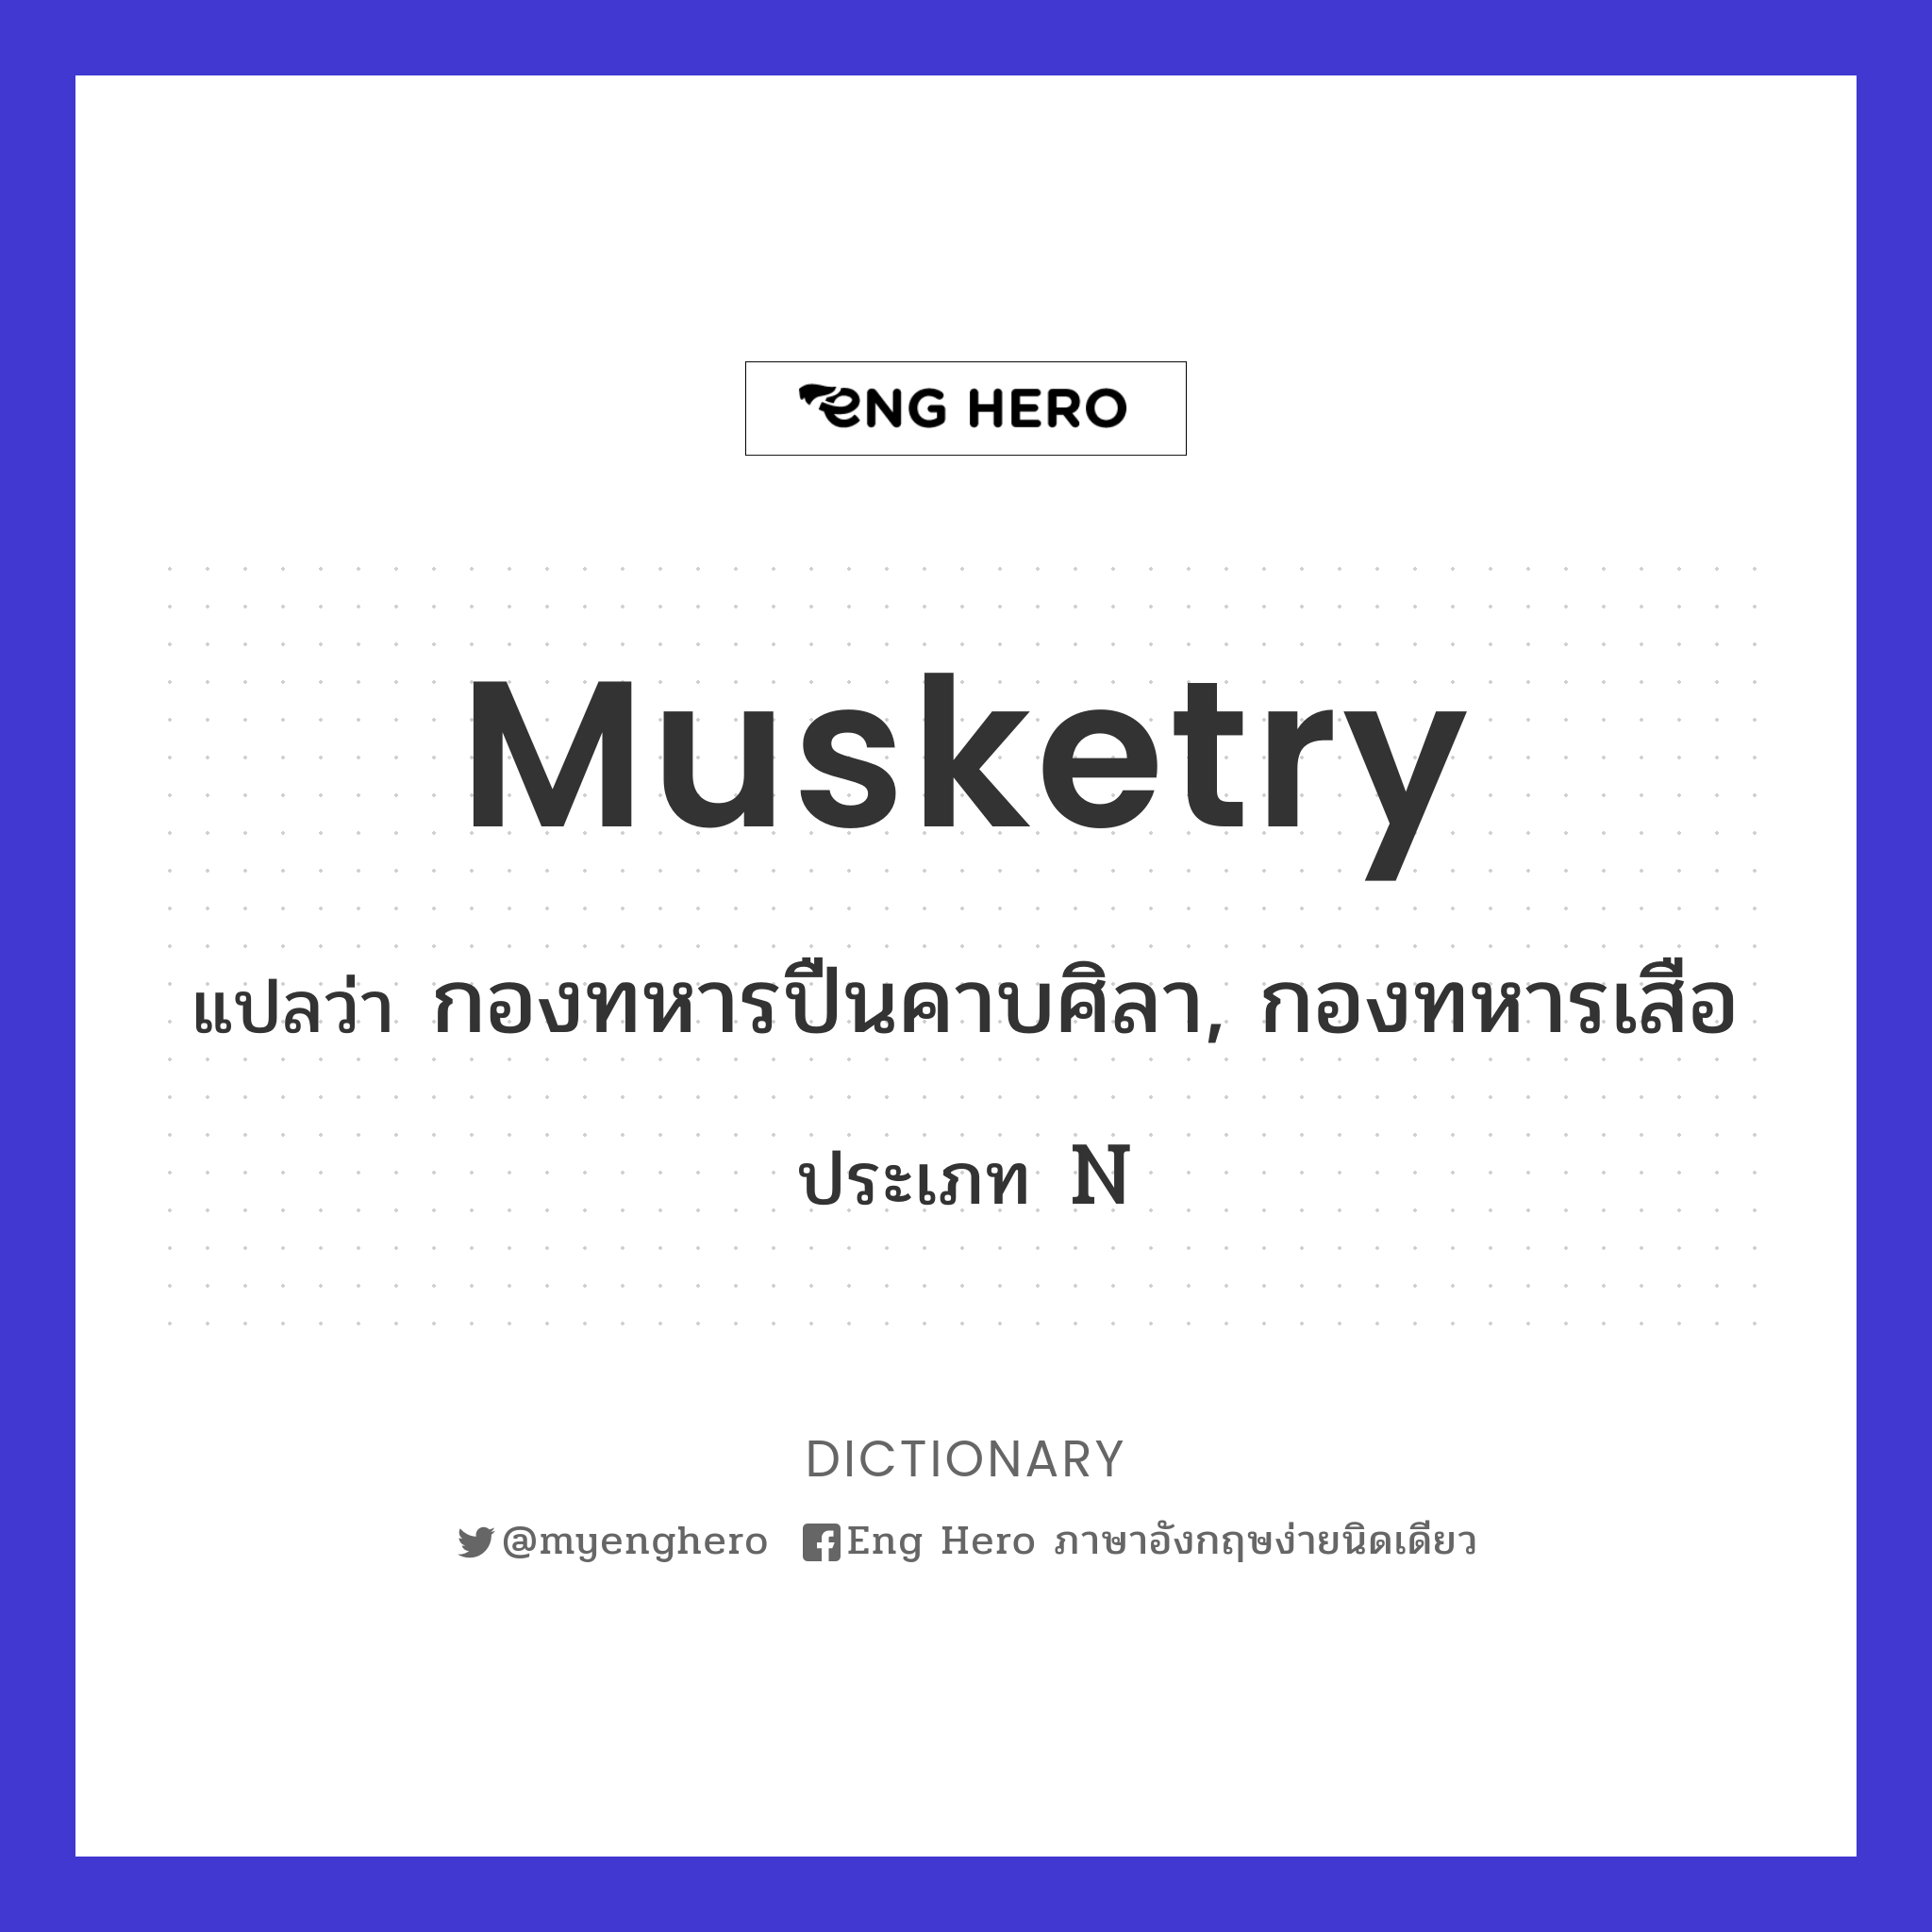 musketry